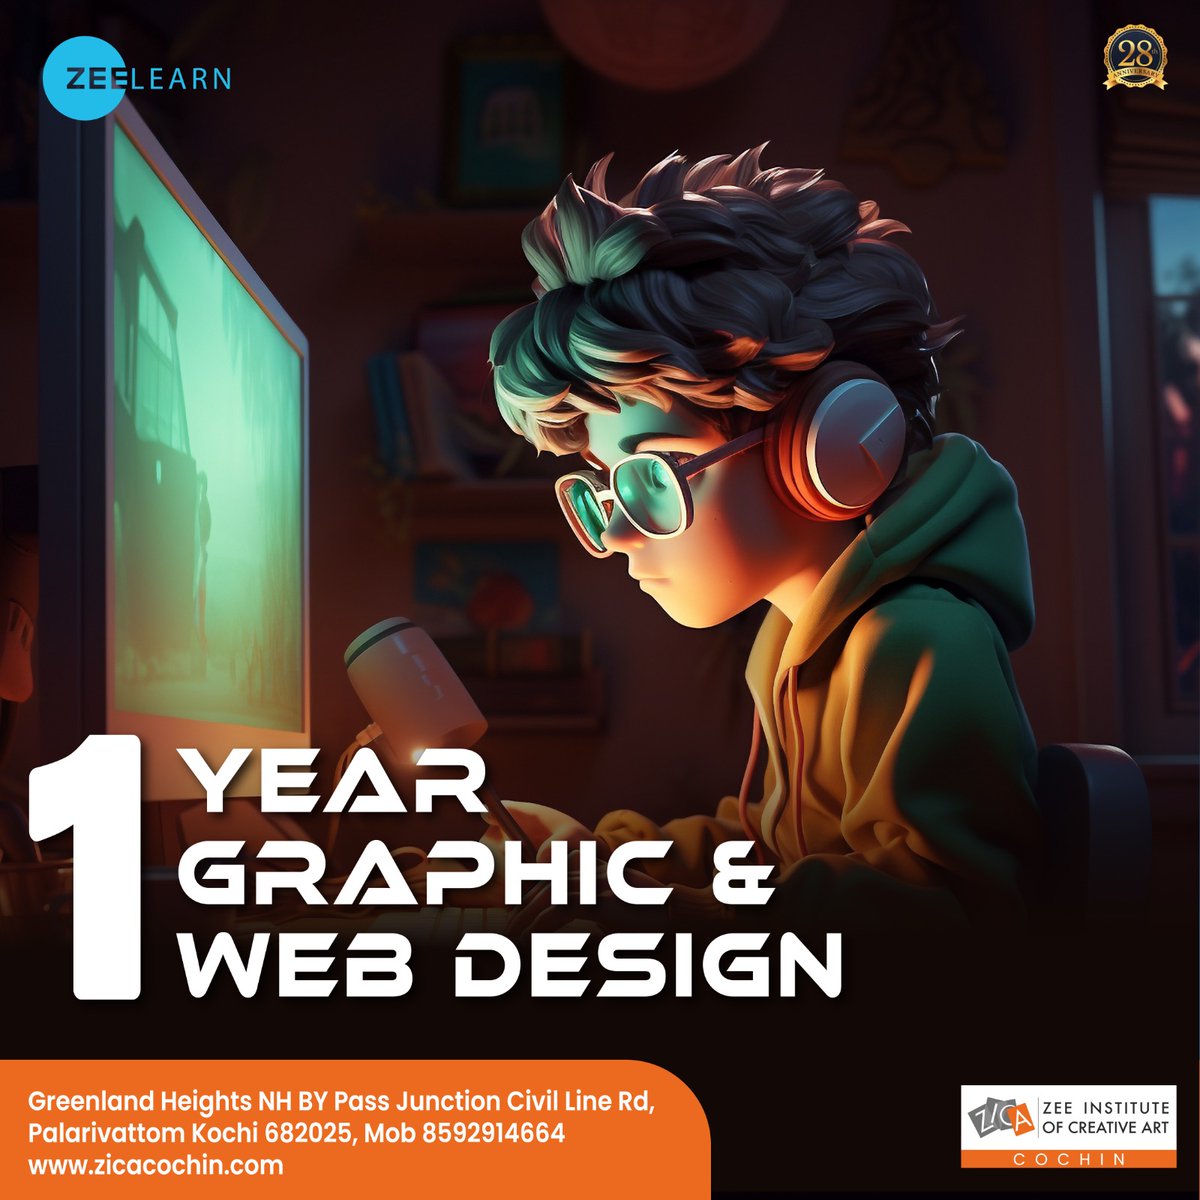 Jumpstart Your Design Career with ZICA Cochin's Comprehensive 1-Year Graphic Design Course! Shape Your Future in Design🎨✨
.
Zee Institute of Creative Art
Contact us : 8592914664
Visit : zicacochin.com
.
#Graphics #CreativeDesigns #creativitymatters #Designing #Graphics